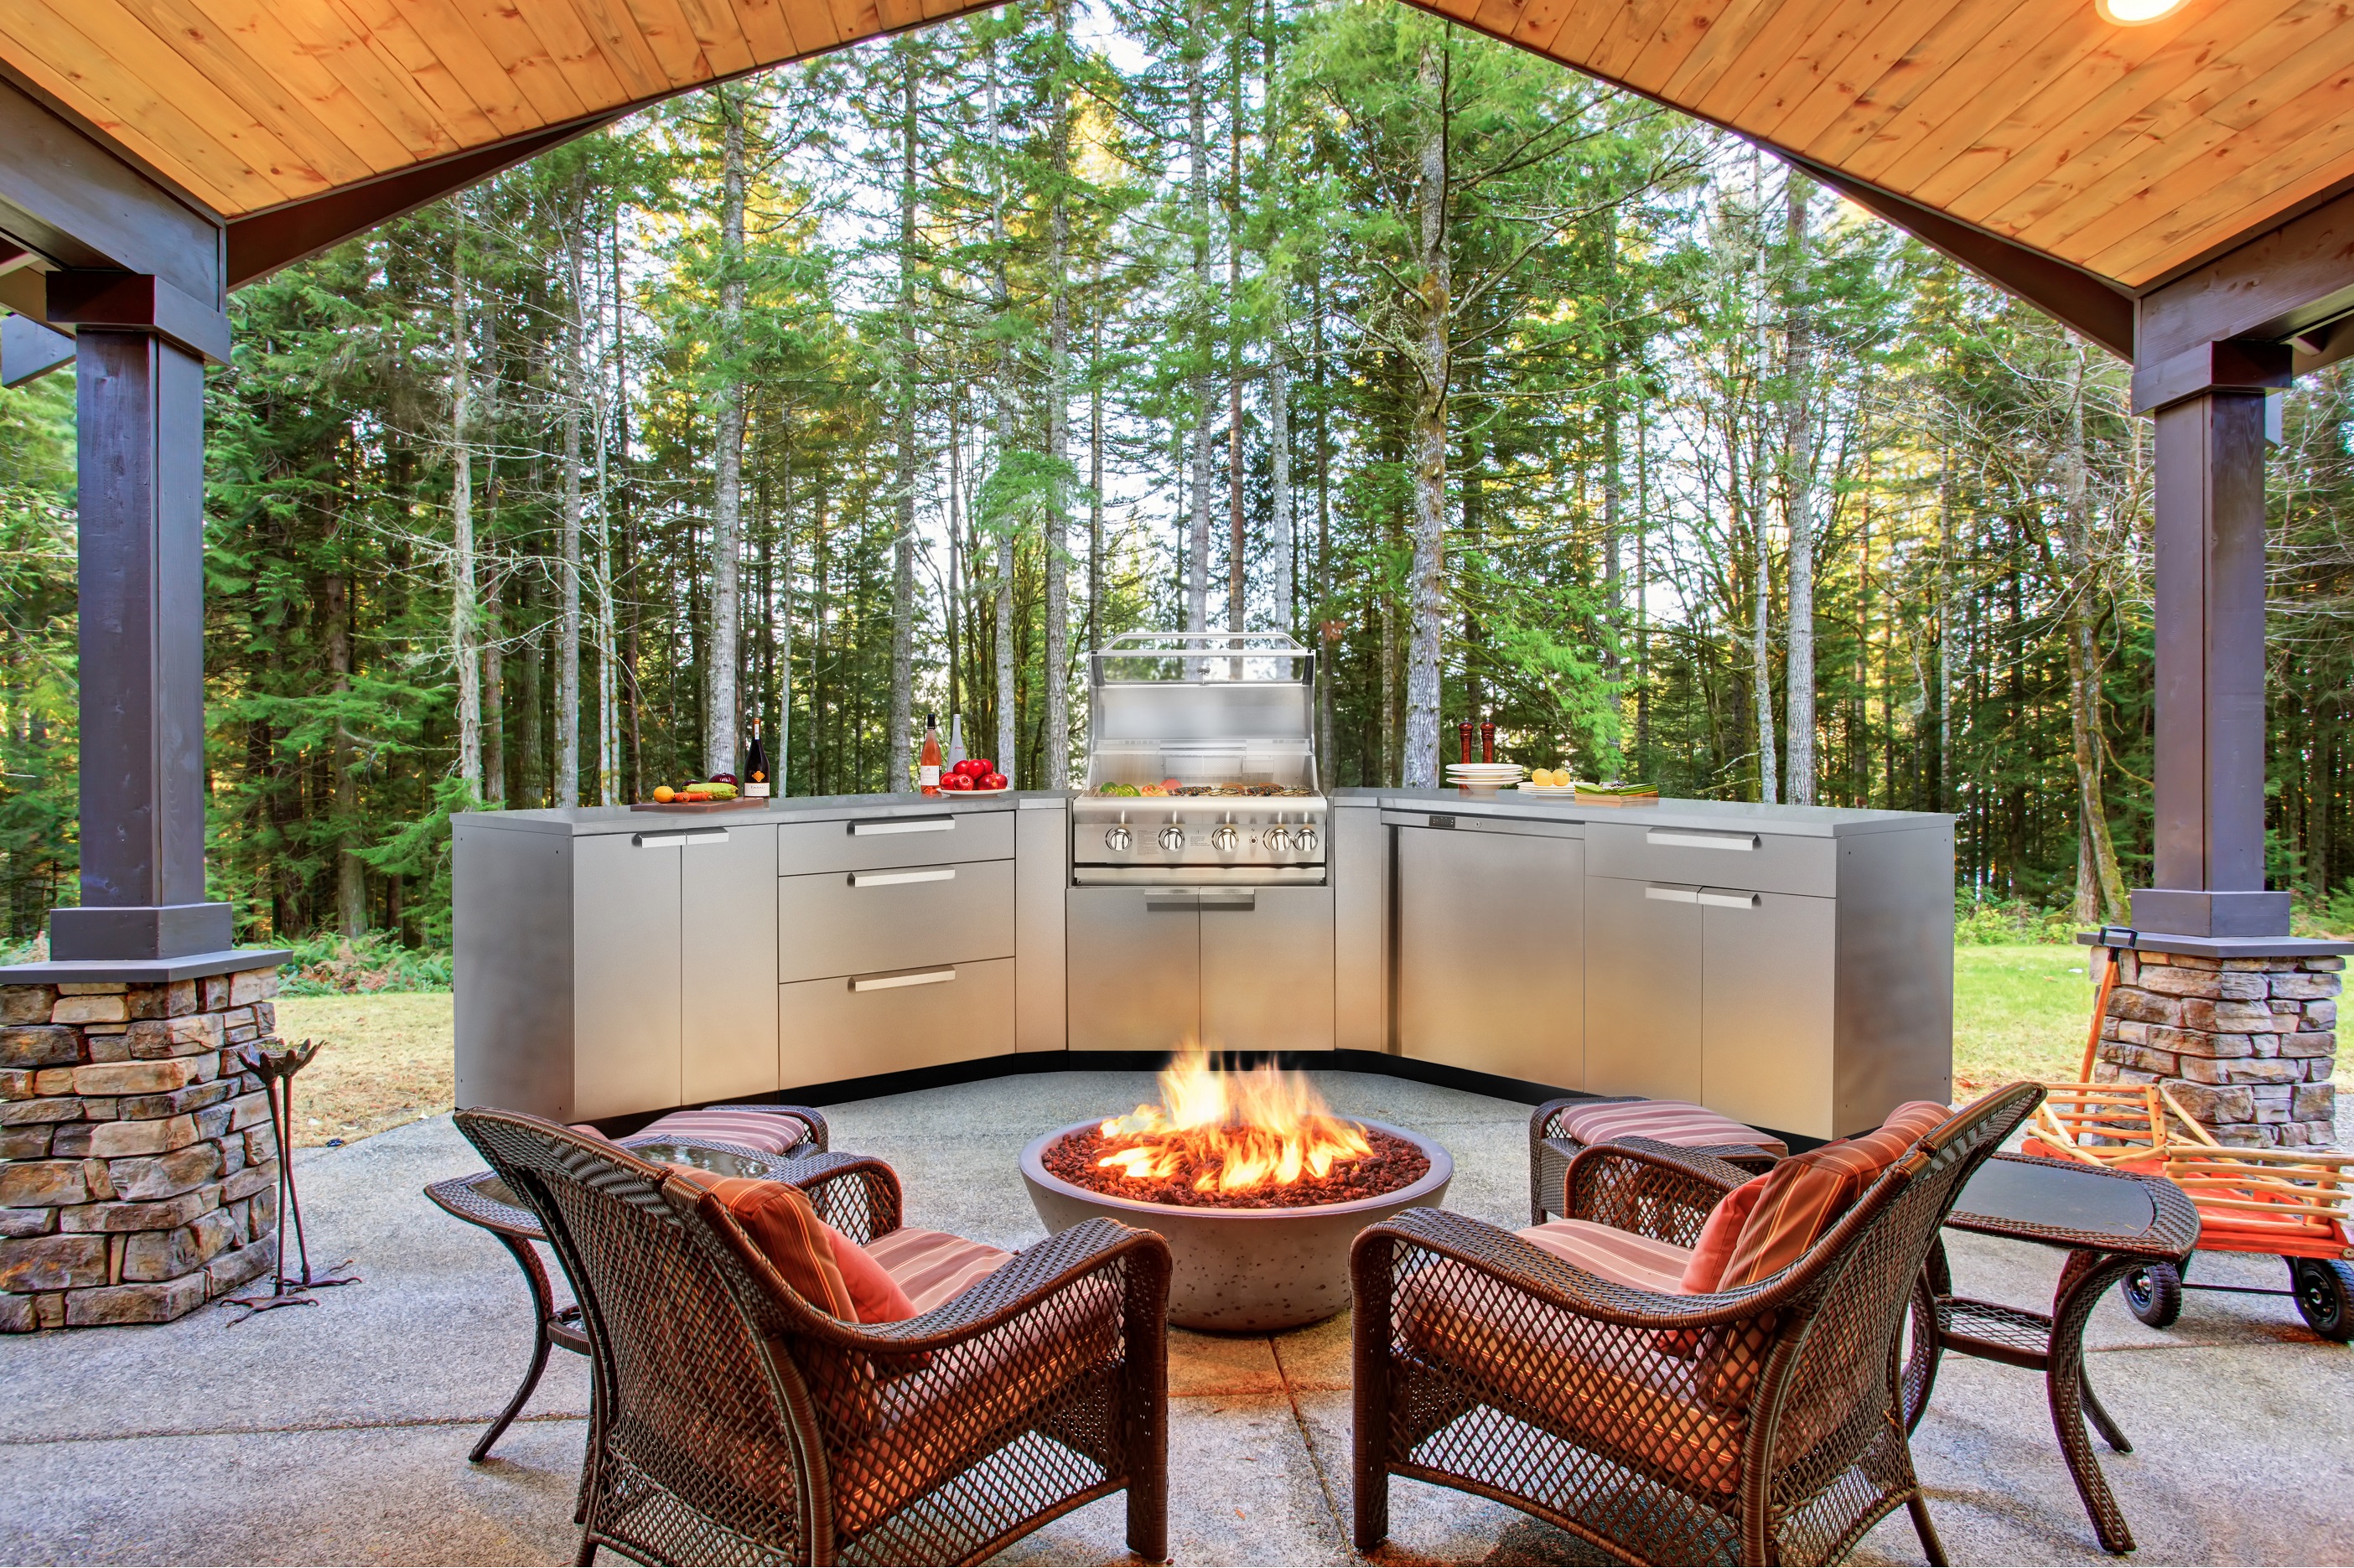 20 Insanely Newage Outdoor Kitchen Home, Family, Style and